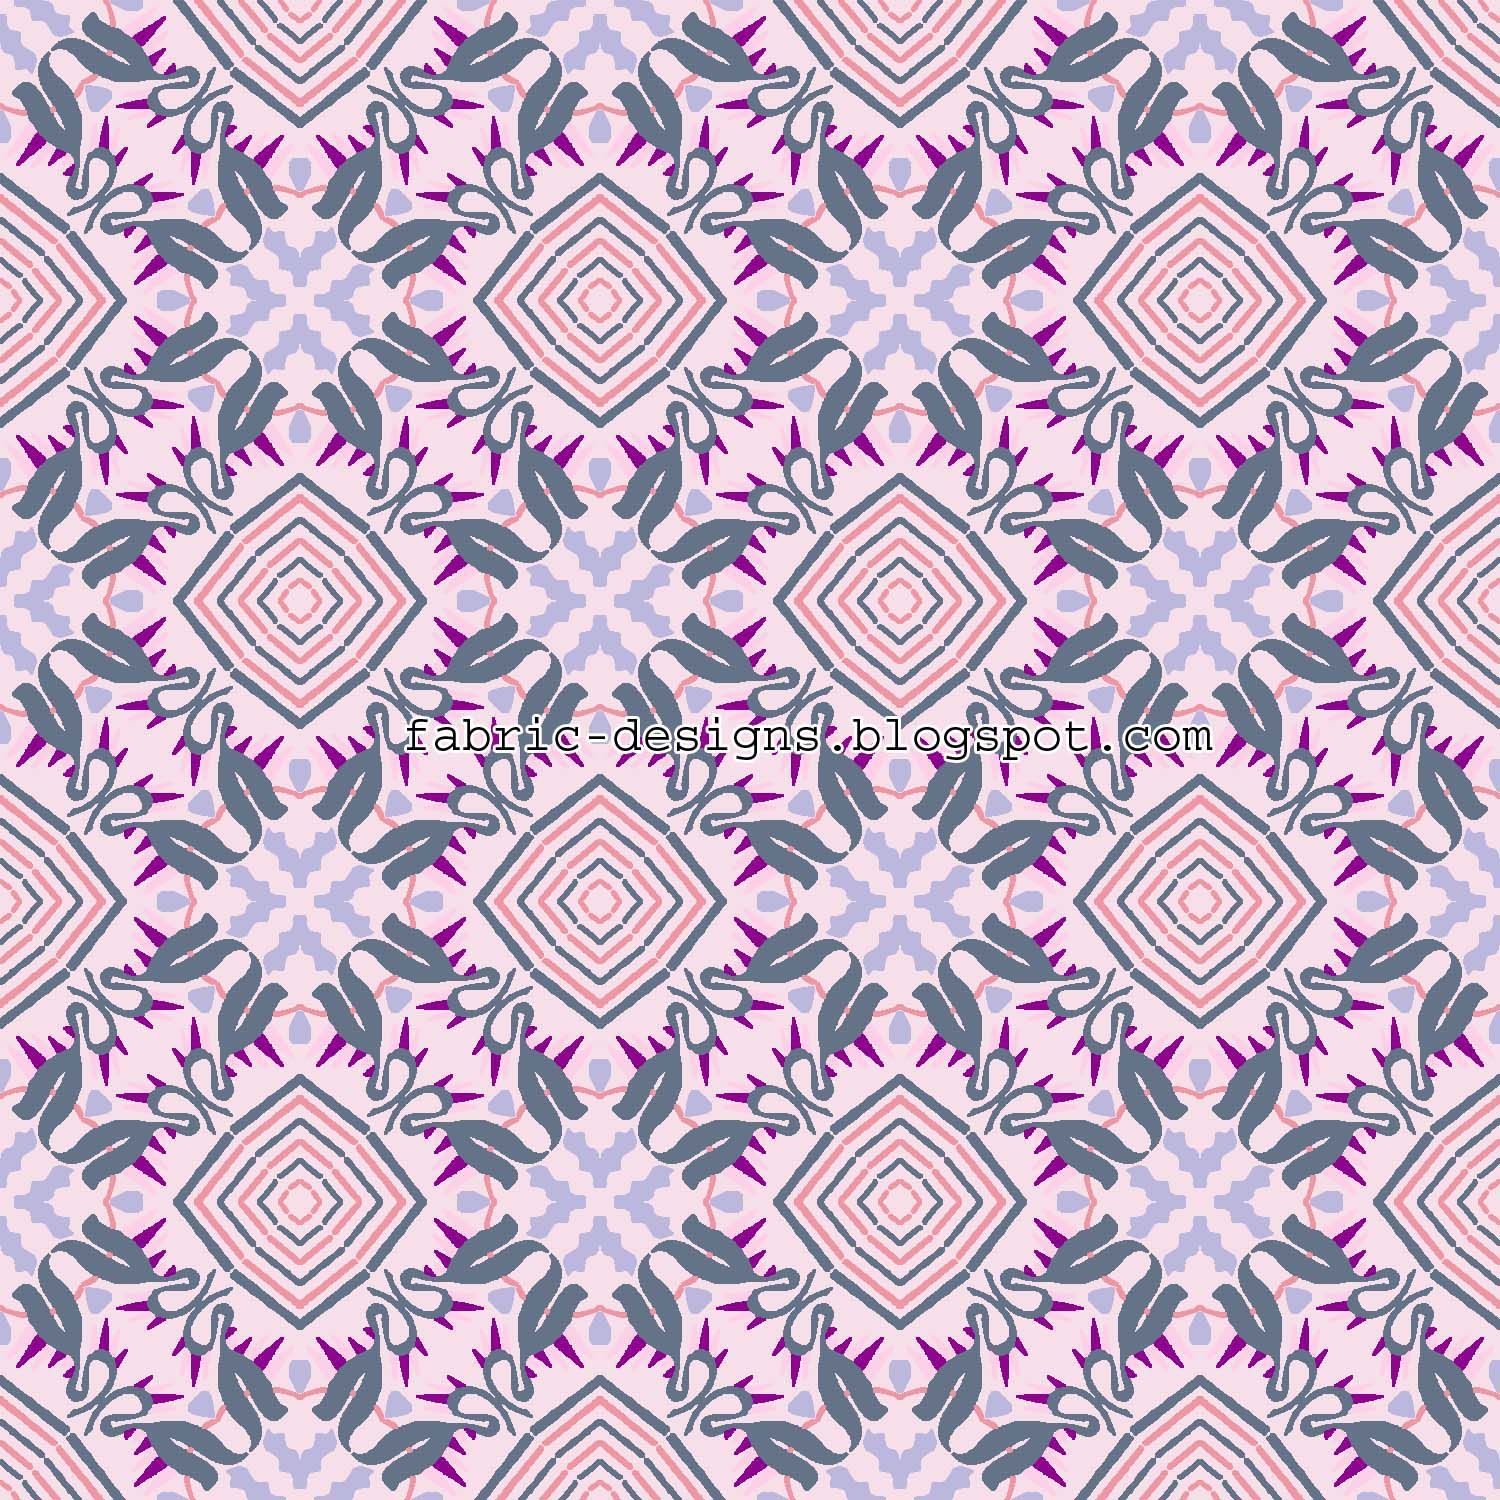 Geometric Fabric Designs | Geometric patterns and vectors for fabric ...